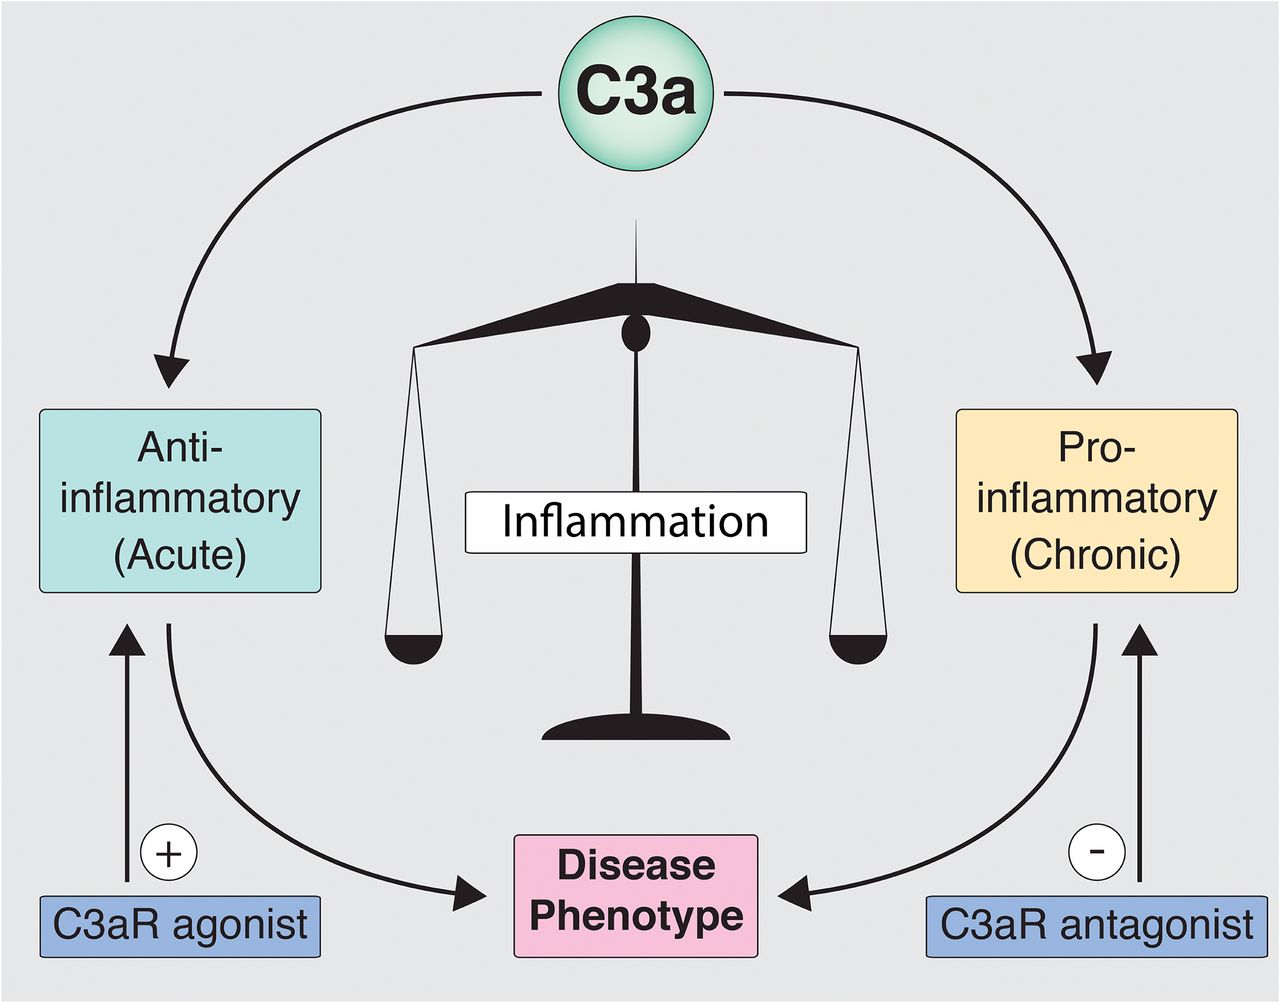 The balance of C3a actions determines the disease phenotype.